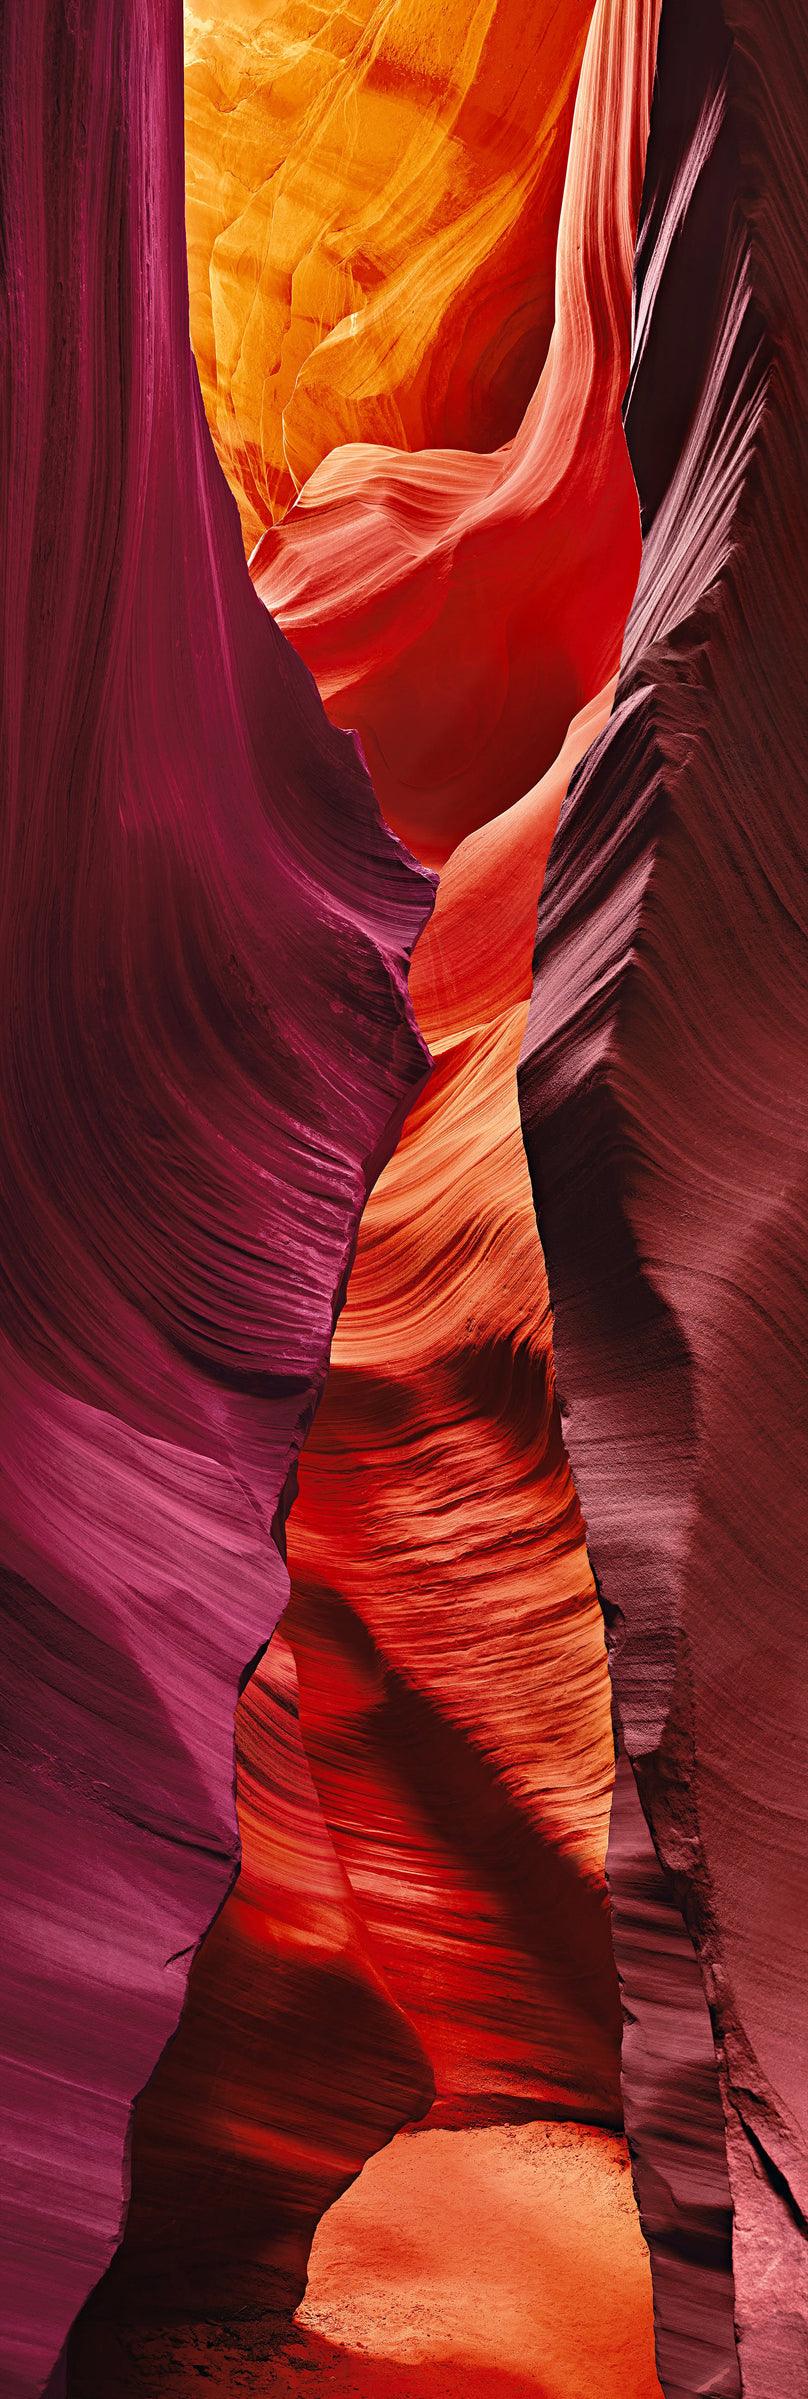 Sand path through the red orange and pink sandstone walls of the slot canyons in Antelope Canyon Arizona